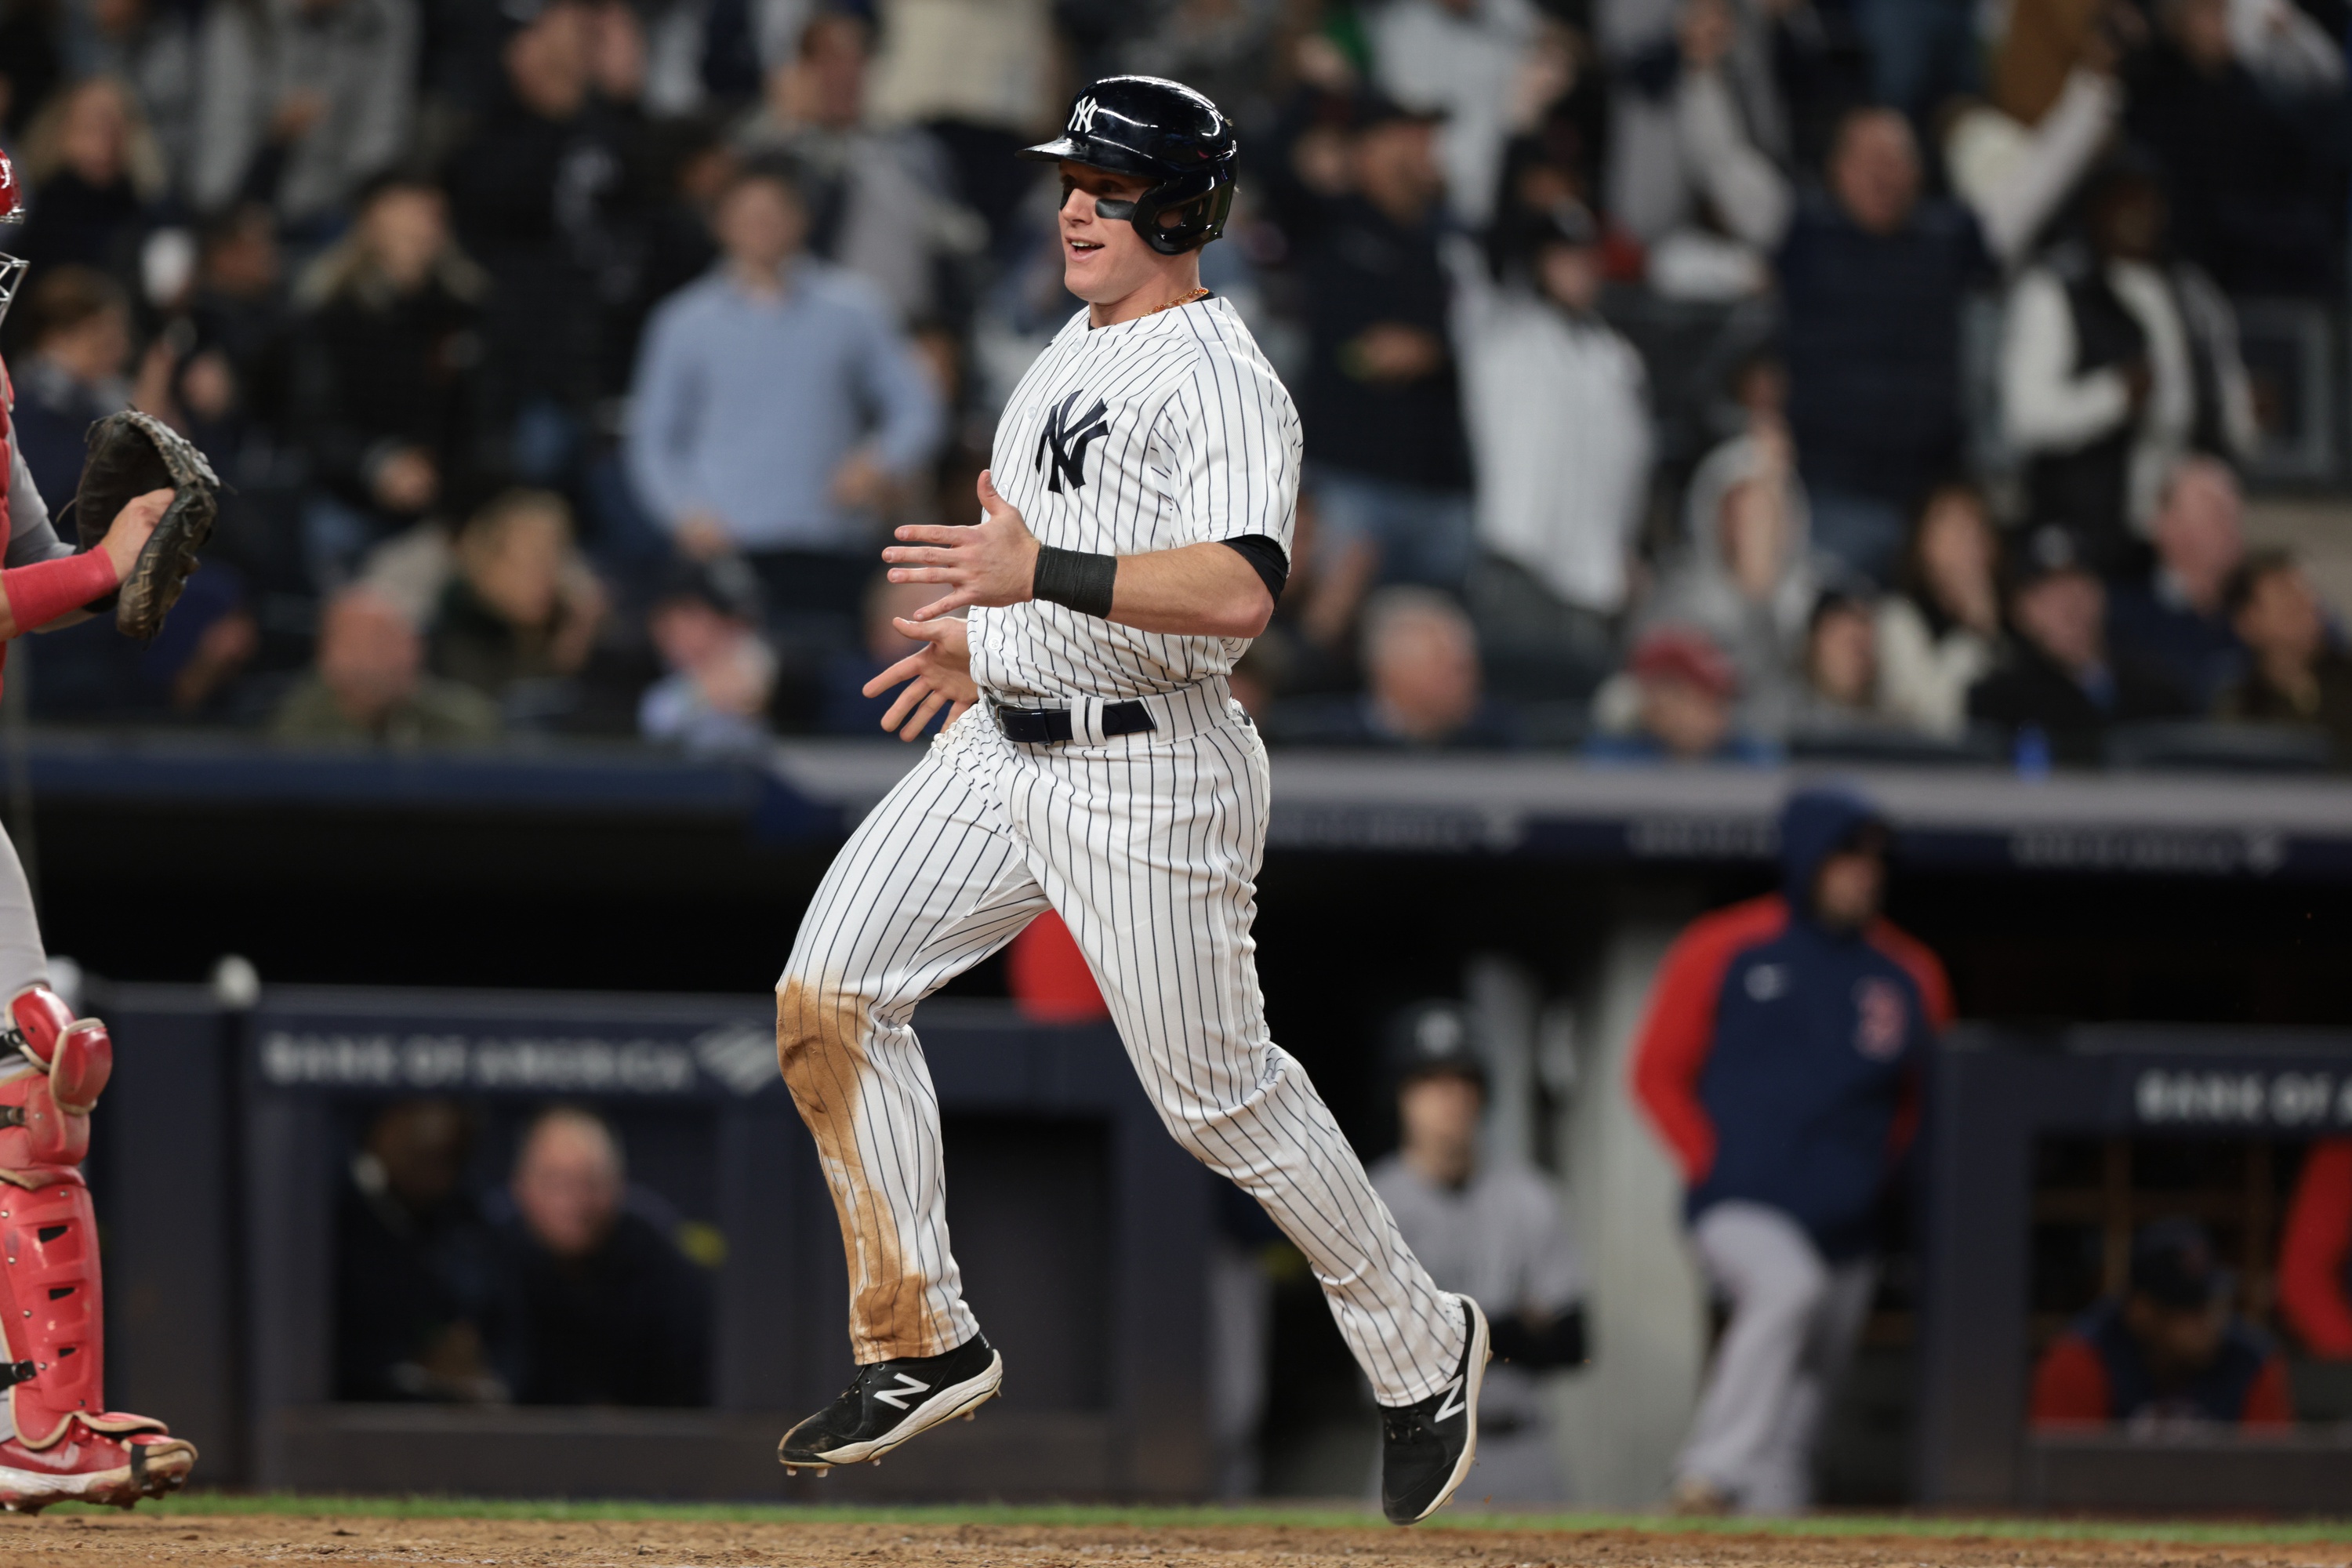 Harrison Bader says Yankees didn't trade for damaged goods, and